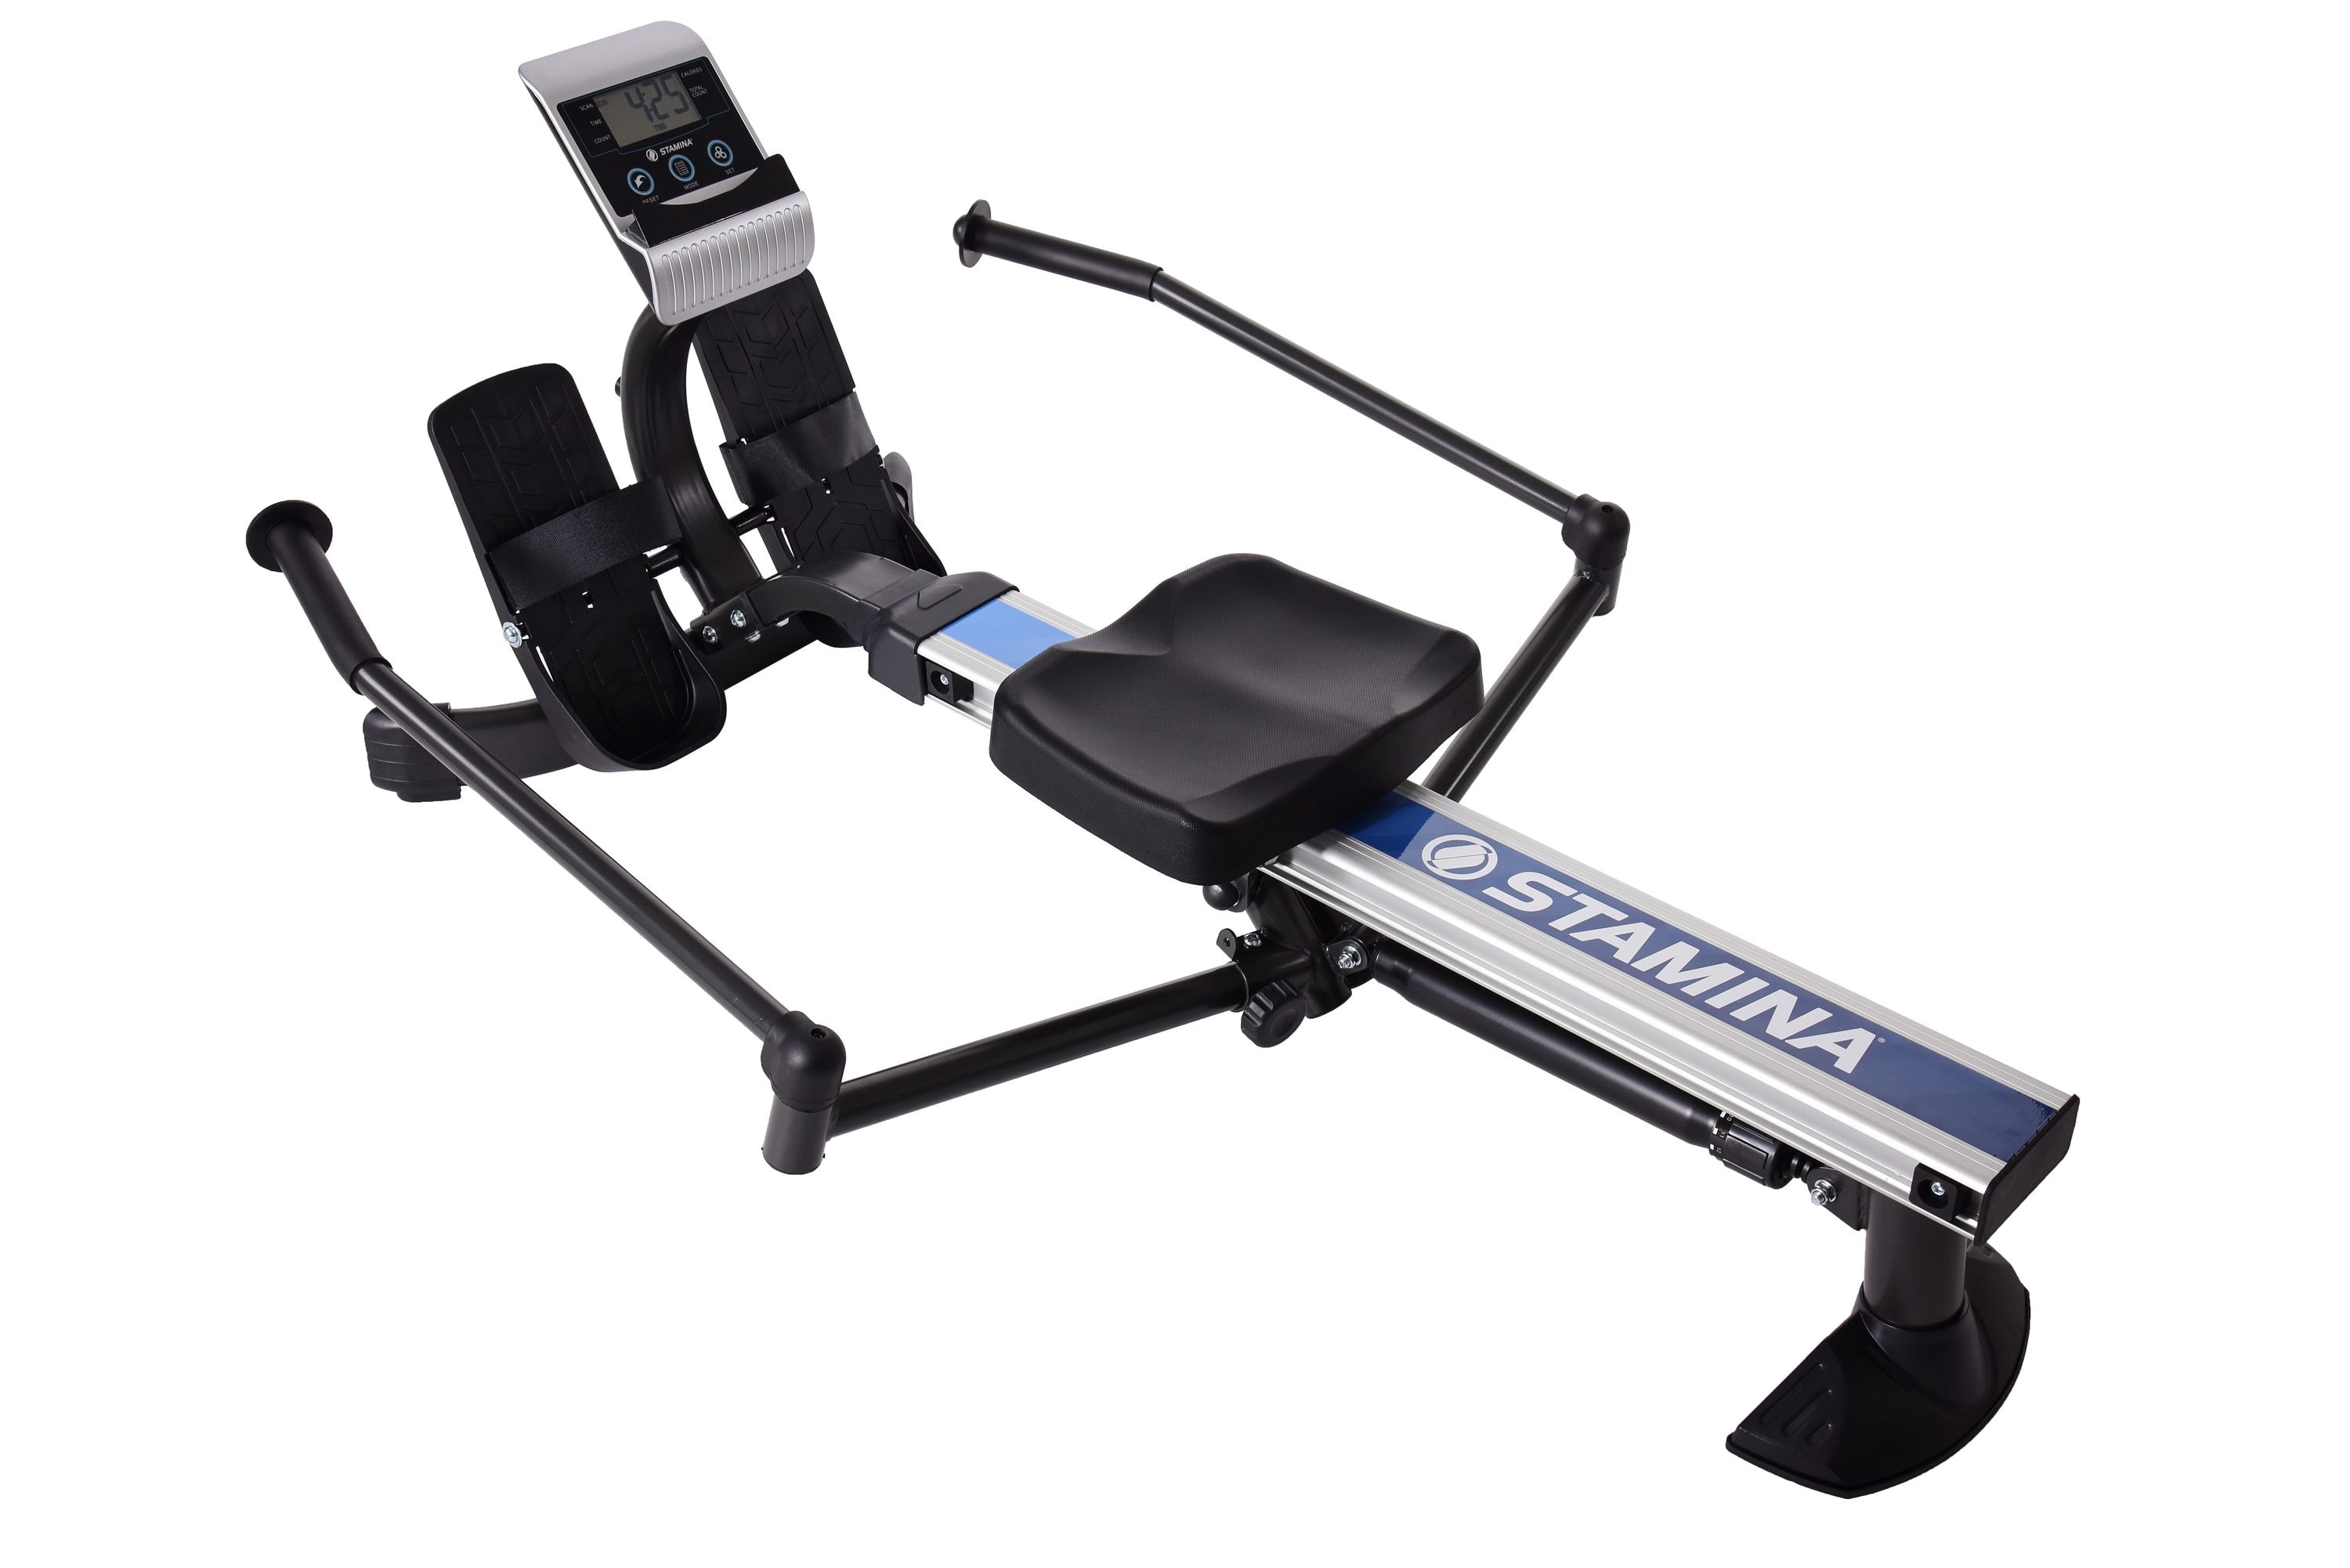 Hydraulic Rower Rowing Machine Adjustable Incline & 12 Resistance Cylinder 